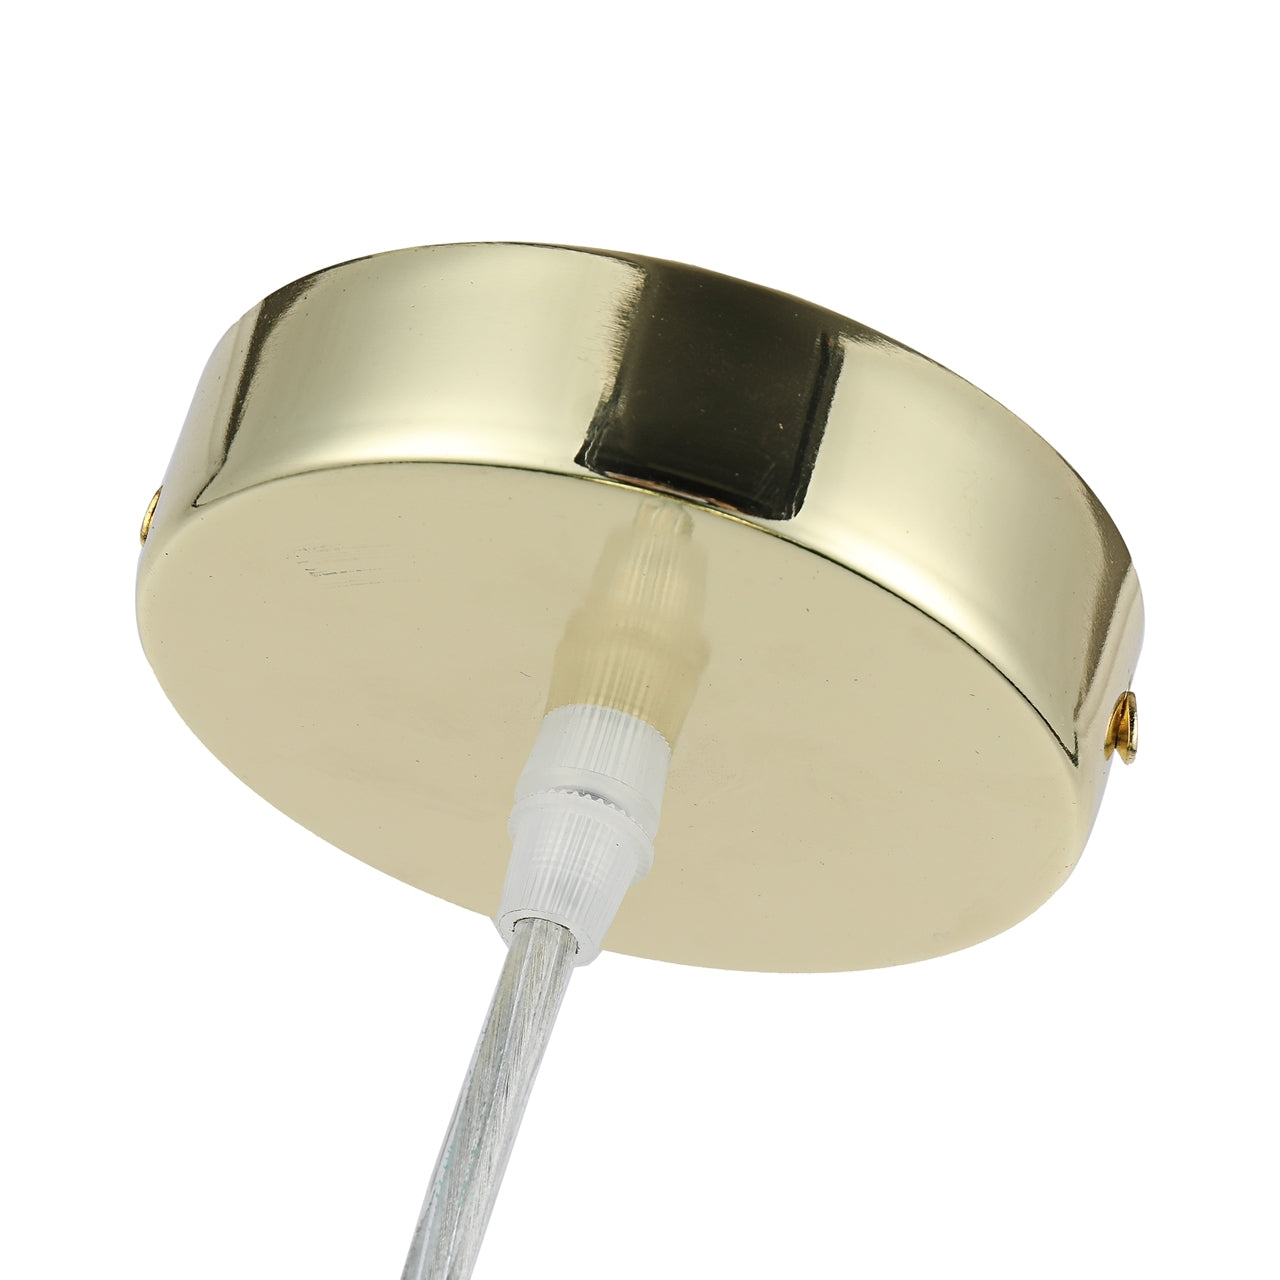 IRONCLAD Contemporary-Style 1 Light Plated Gold Ceiling Mini Pendant 8" Wide